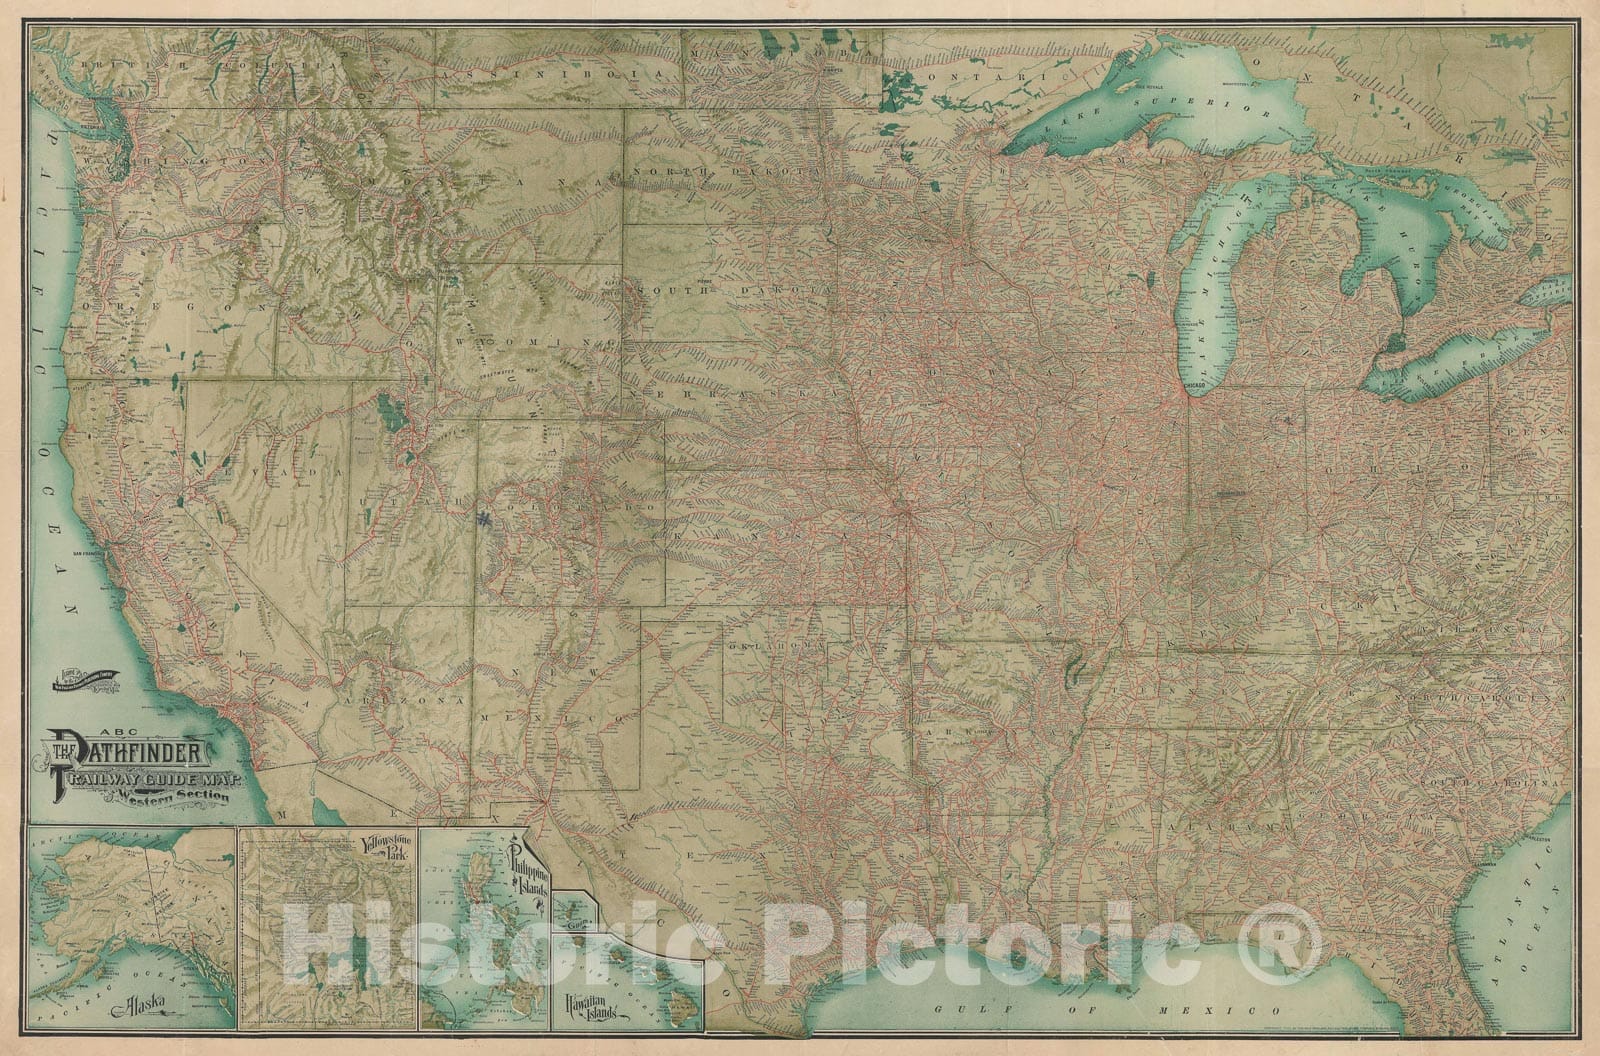 Historic Map : Railway Publishing Pathfinder Railroad Map of The Western United States, 1902, Vintage Wall Art